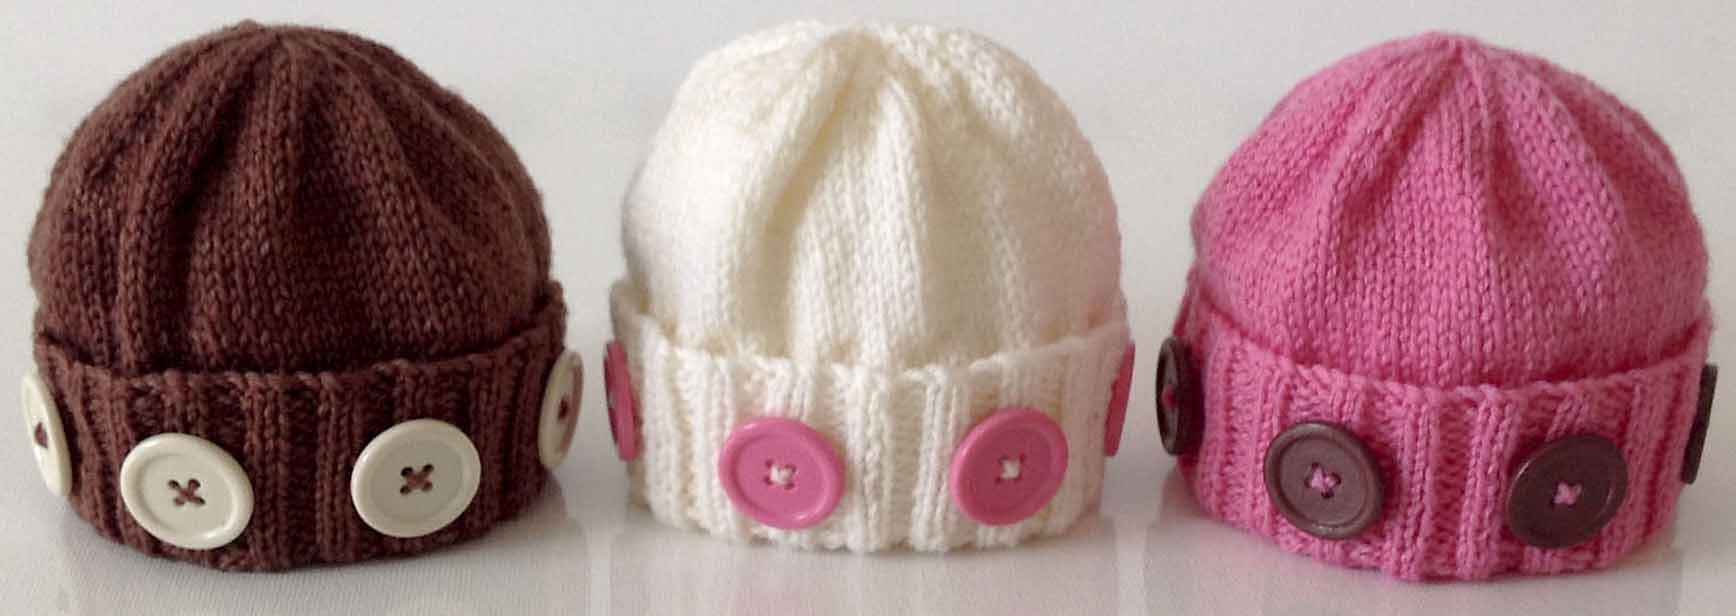 Double Knitting Patterns For Babies Free Knitting Patterns